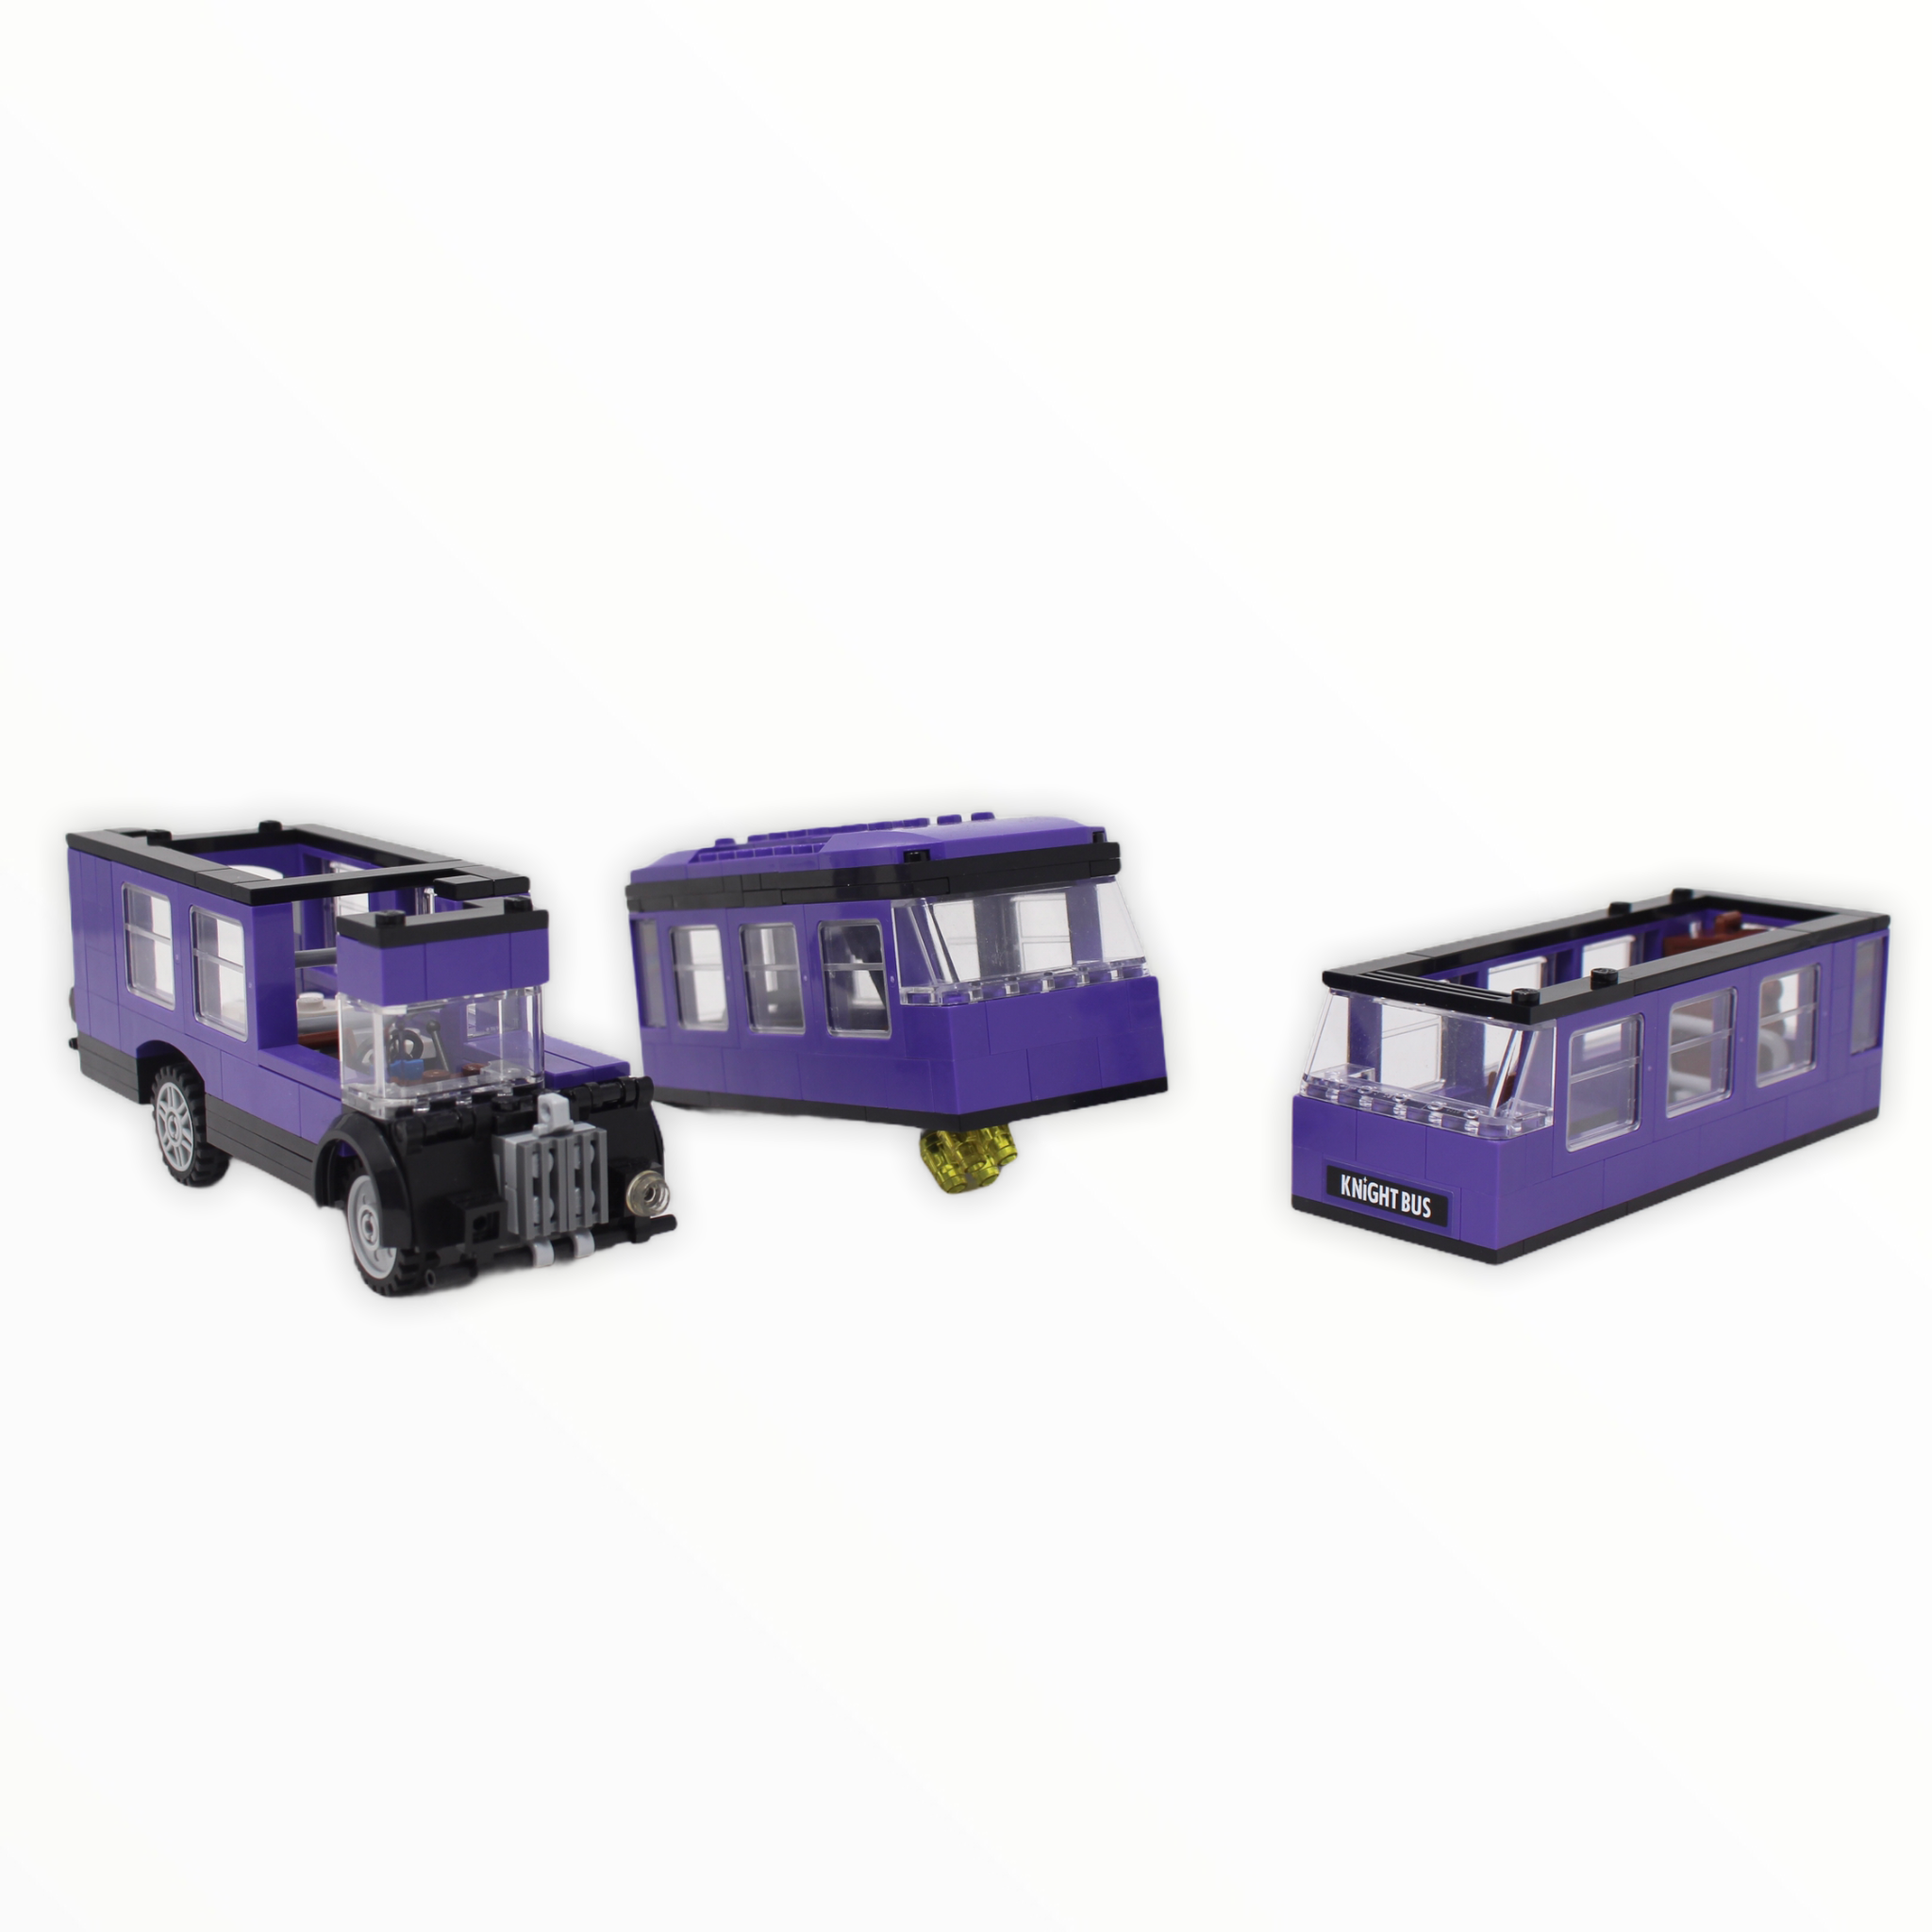 Used Set 4866 Harry Potter The Knight Bus (2011)